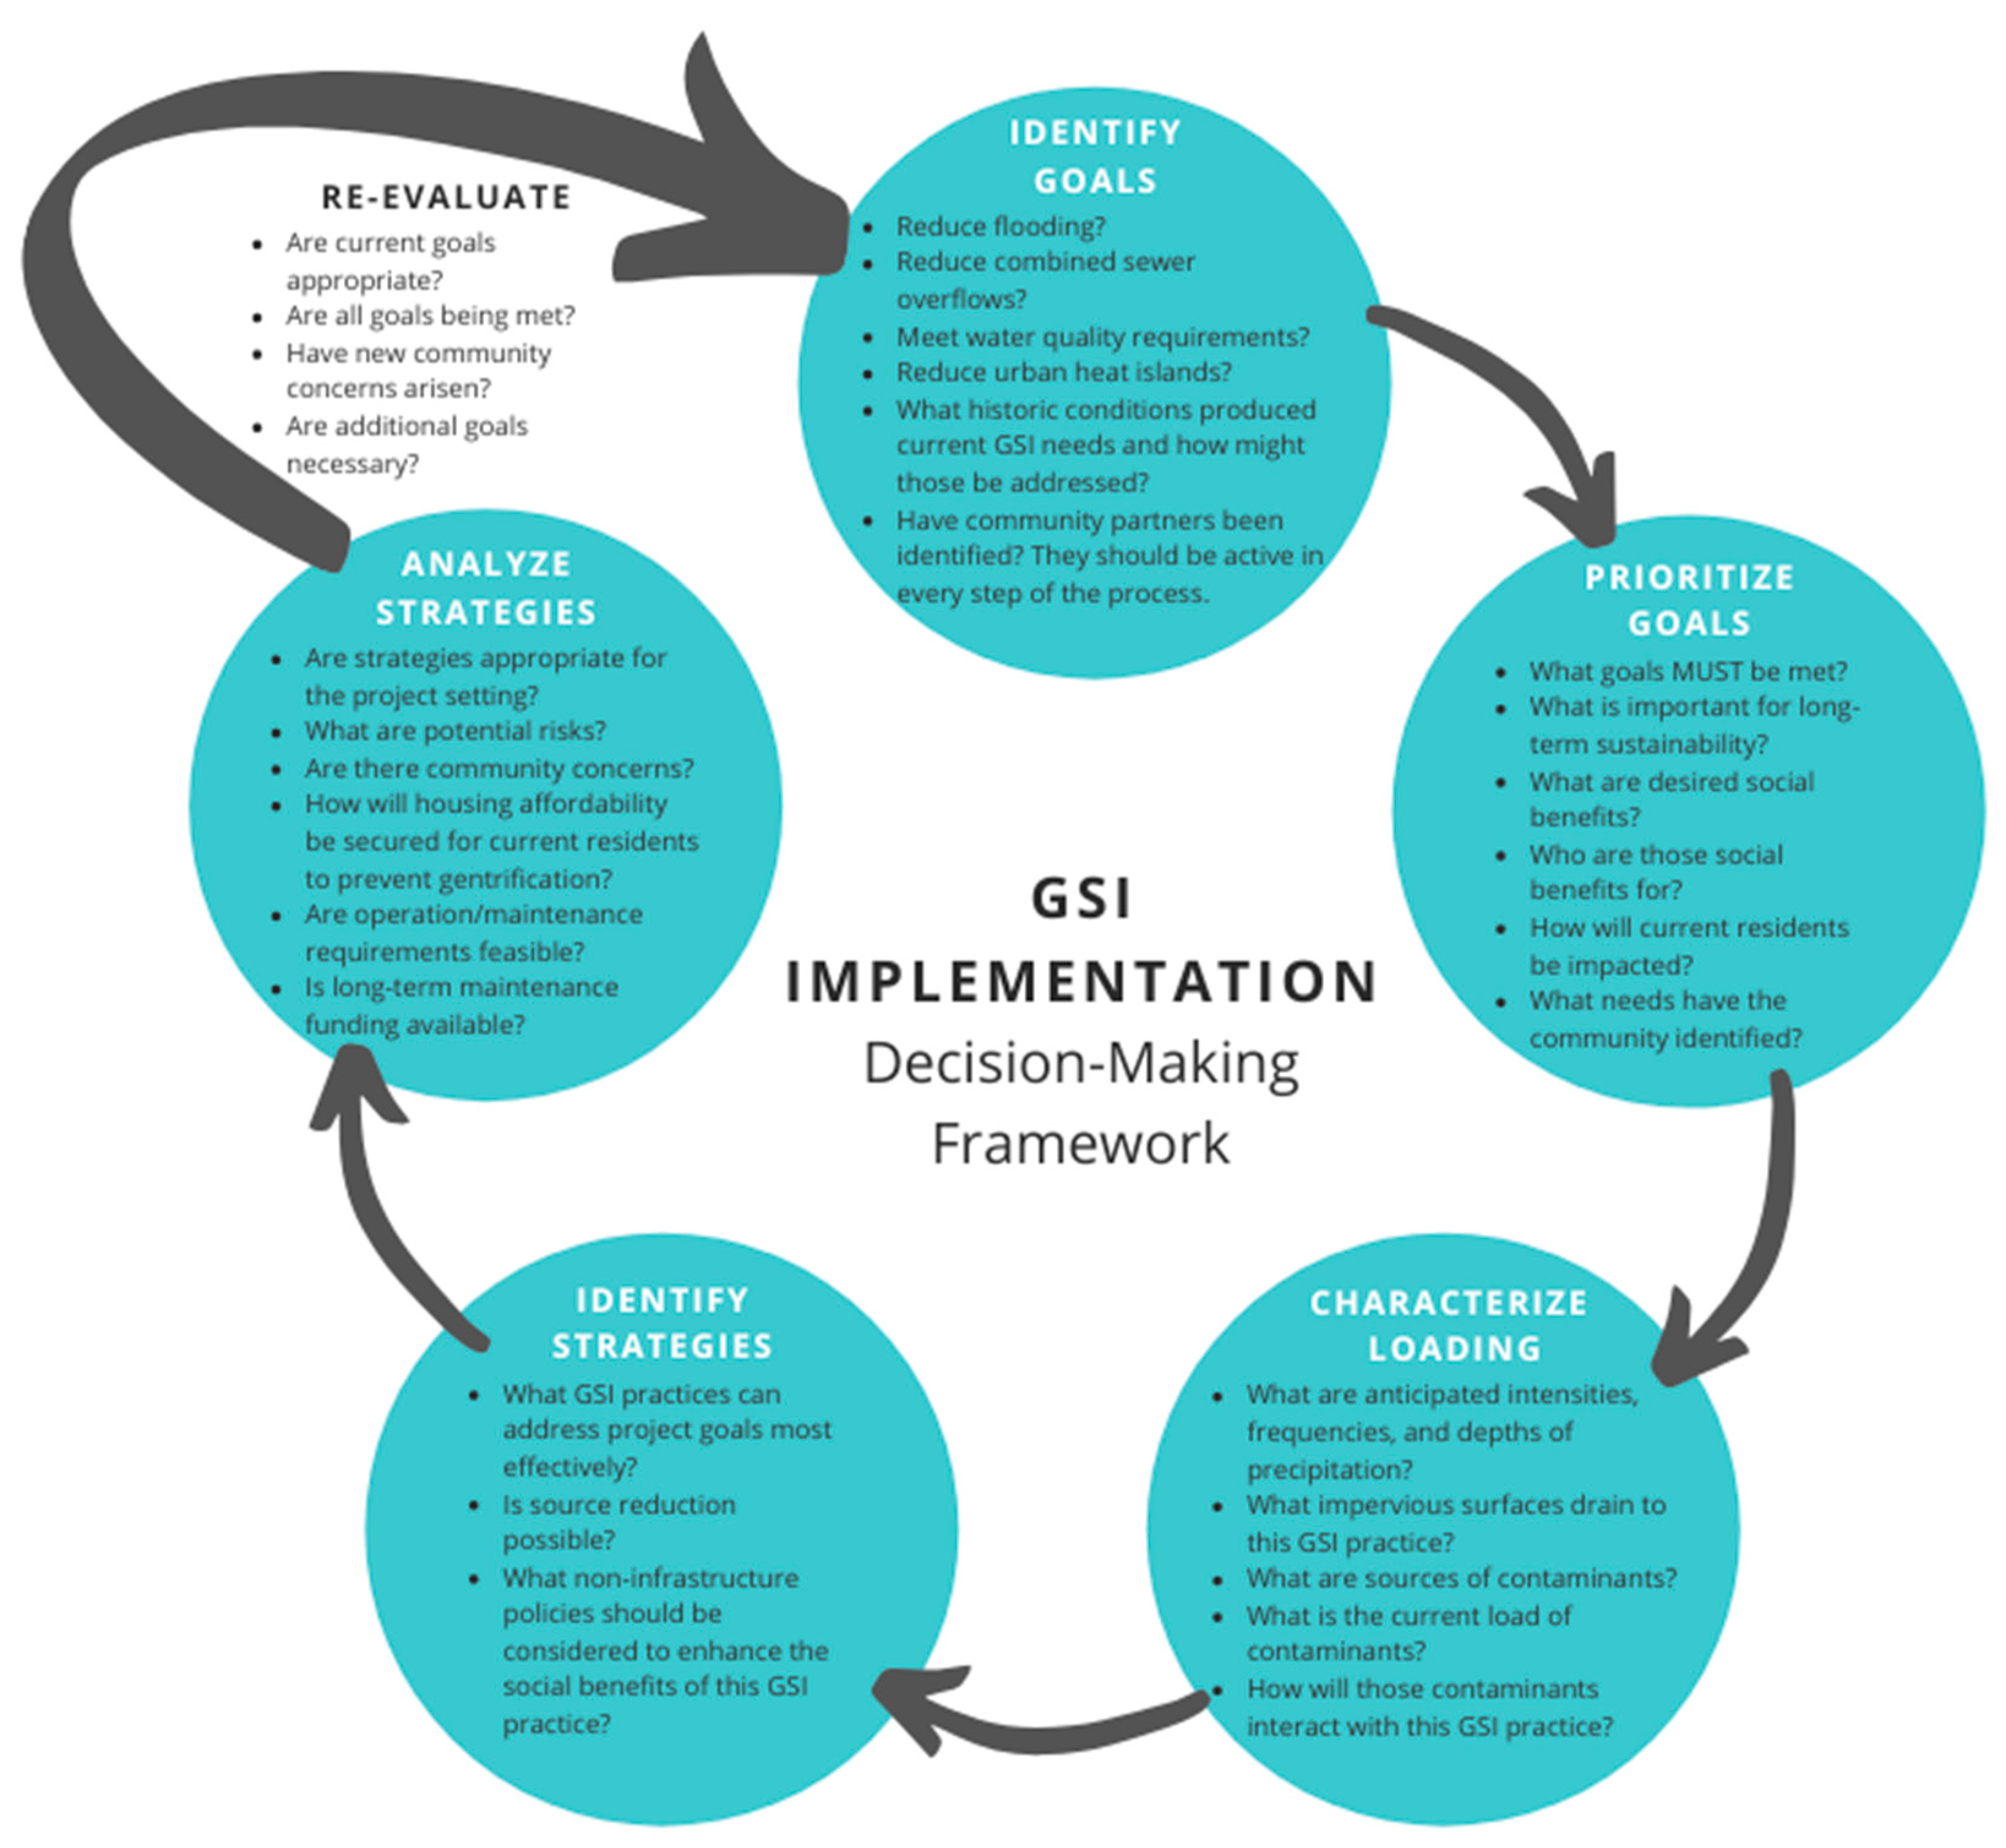 Figure 2. Decision-making framework for equitably and effectively implementing green stormwater infrastructure (GSI) (source: Taguchi et al. 2020).